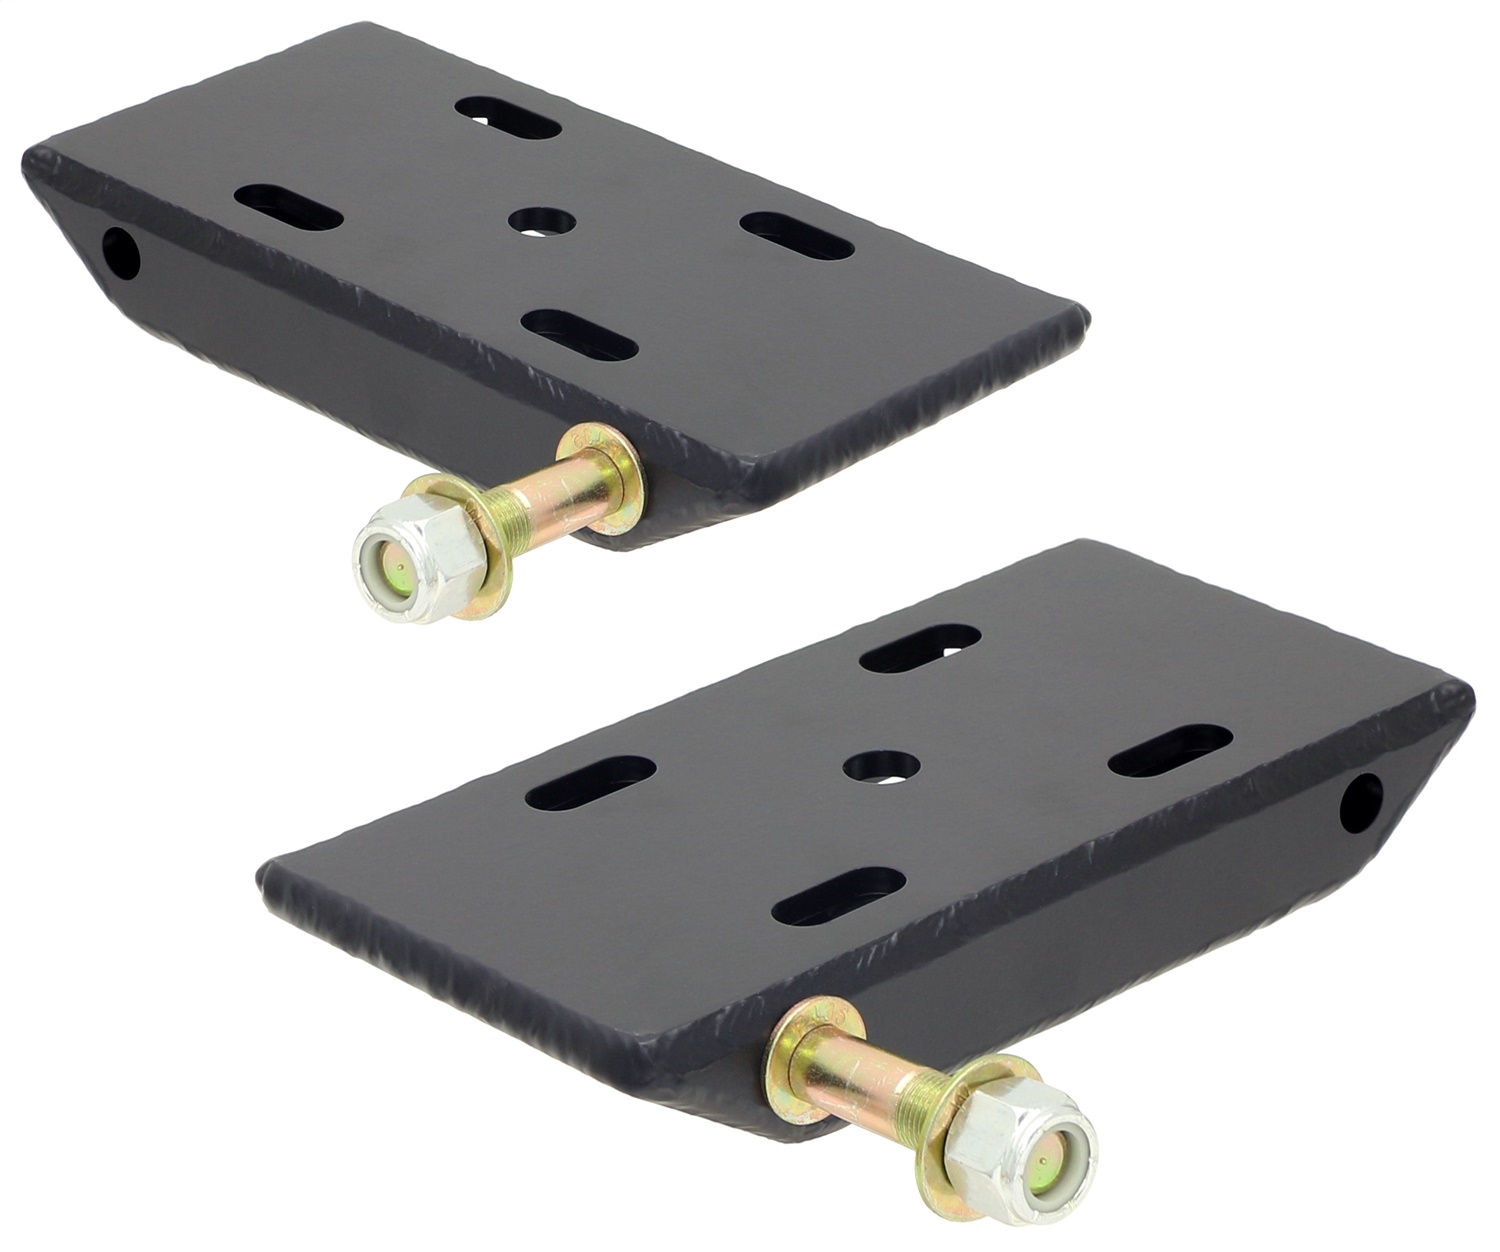 Rockjock Heavy Duty Leaf Spring Plates Incl. Replaceable Shock Mounts For Use W/2.5